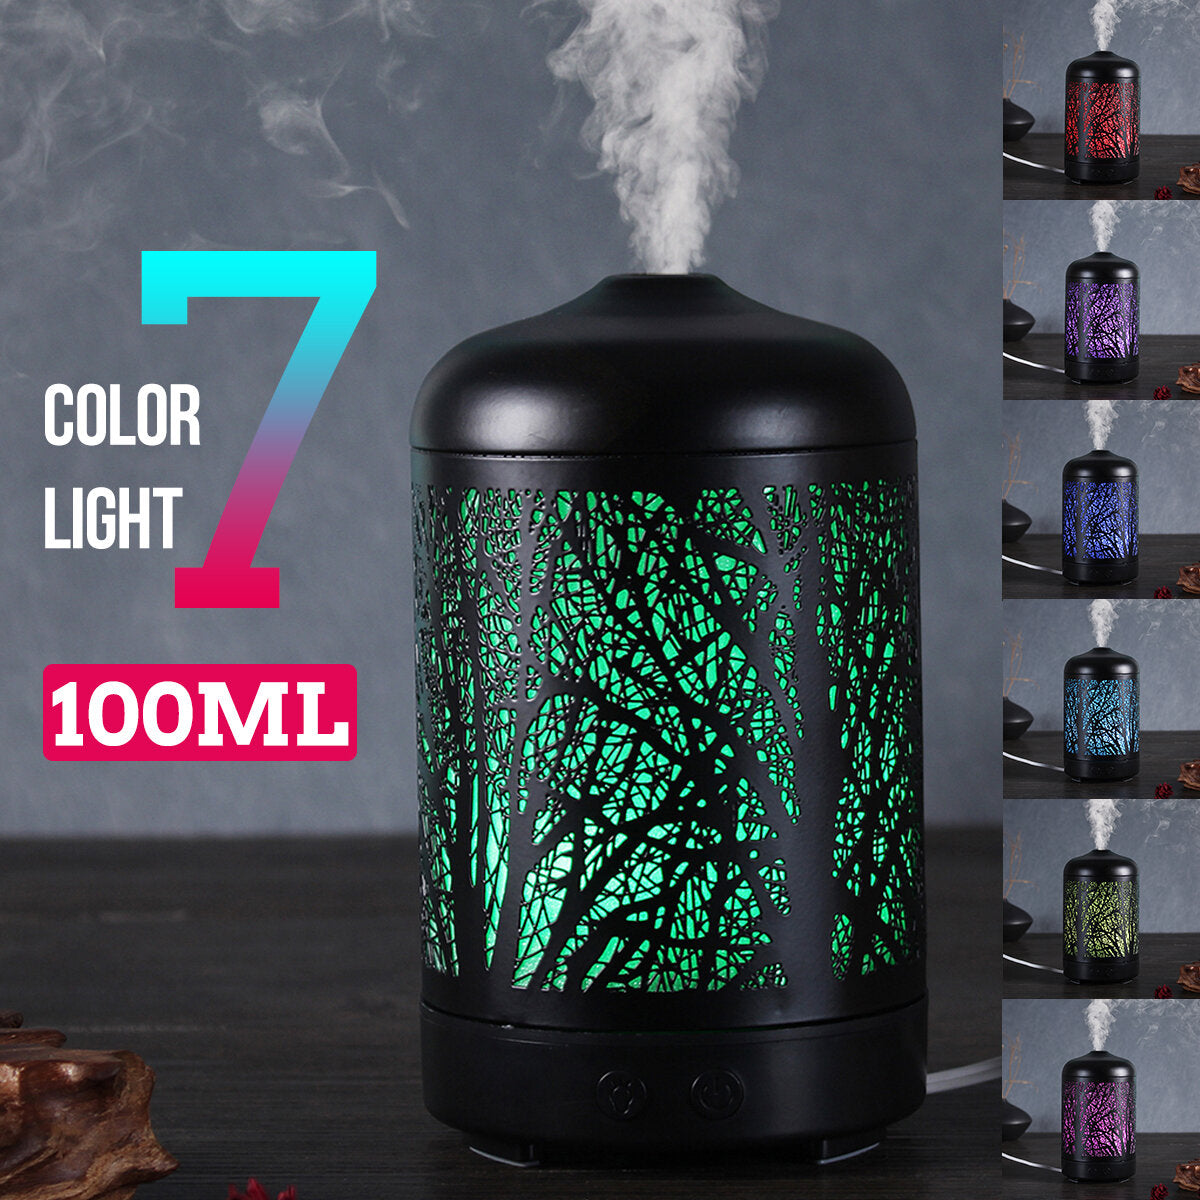 100ml Air Humidifier Aroma Diffuser Purifier Ultrasonic Aromatherapy with Color Light for Home Office